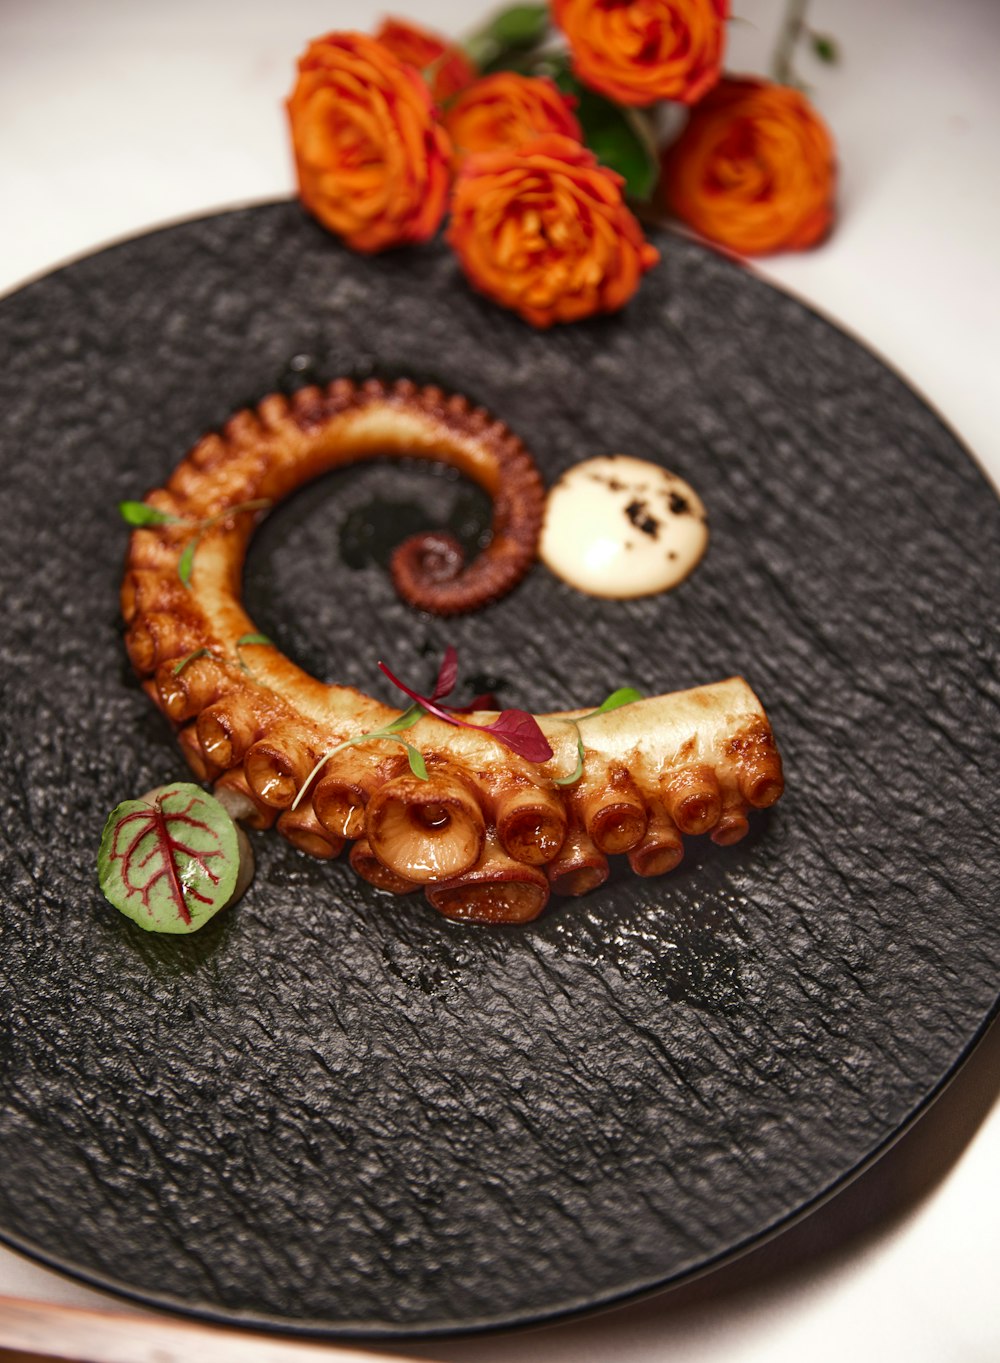 a black plate topped with an octopus and other food items